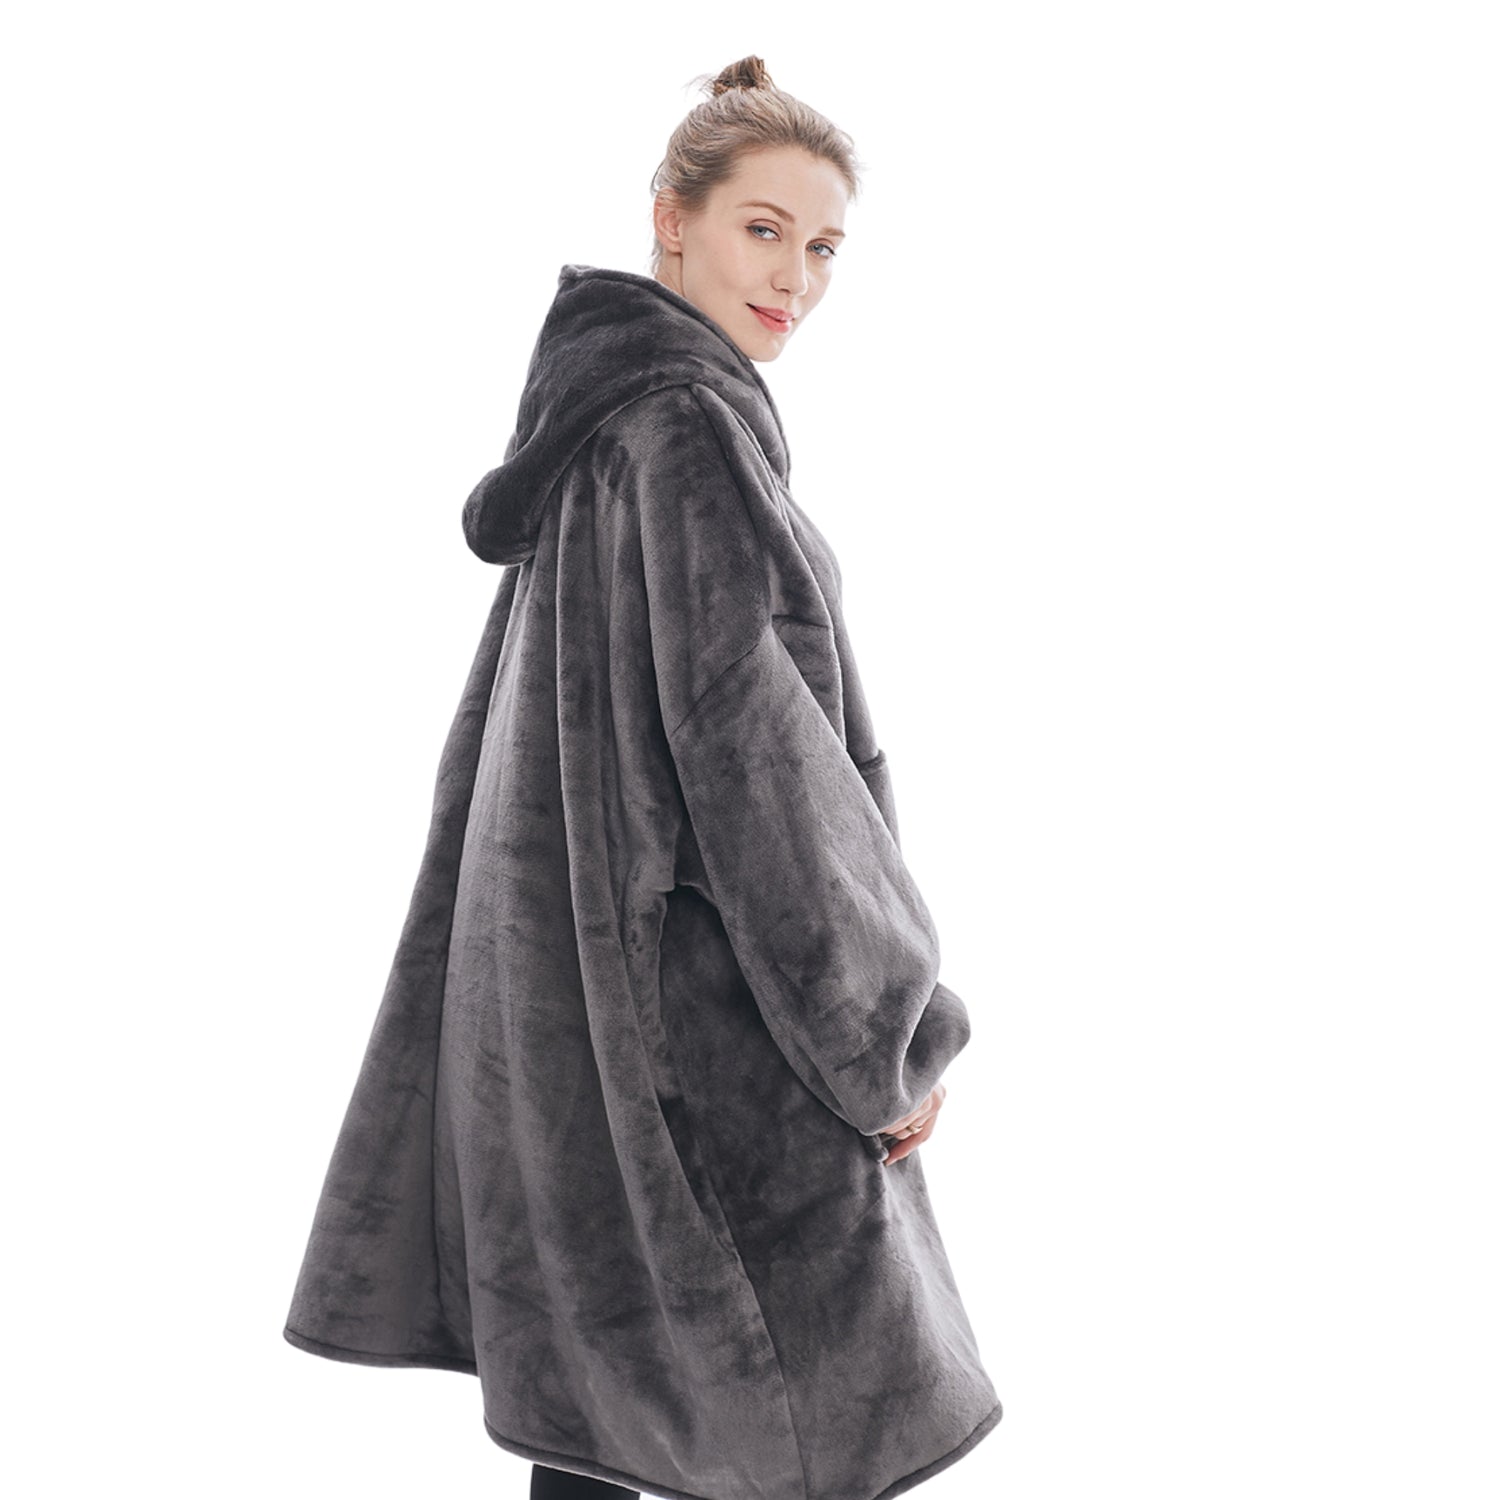 Pull Plaid Femme Anthracite Sweat Polaire Géant Oversized Hoodie® doublure polaire sherpa gris